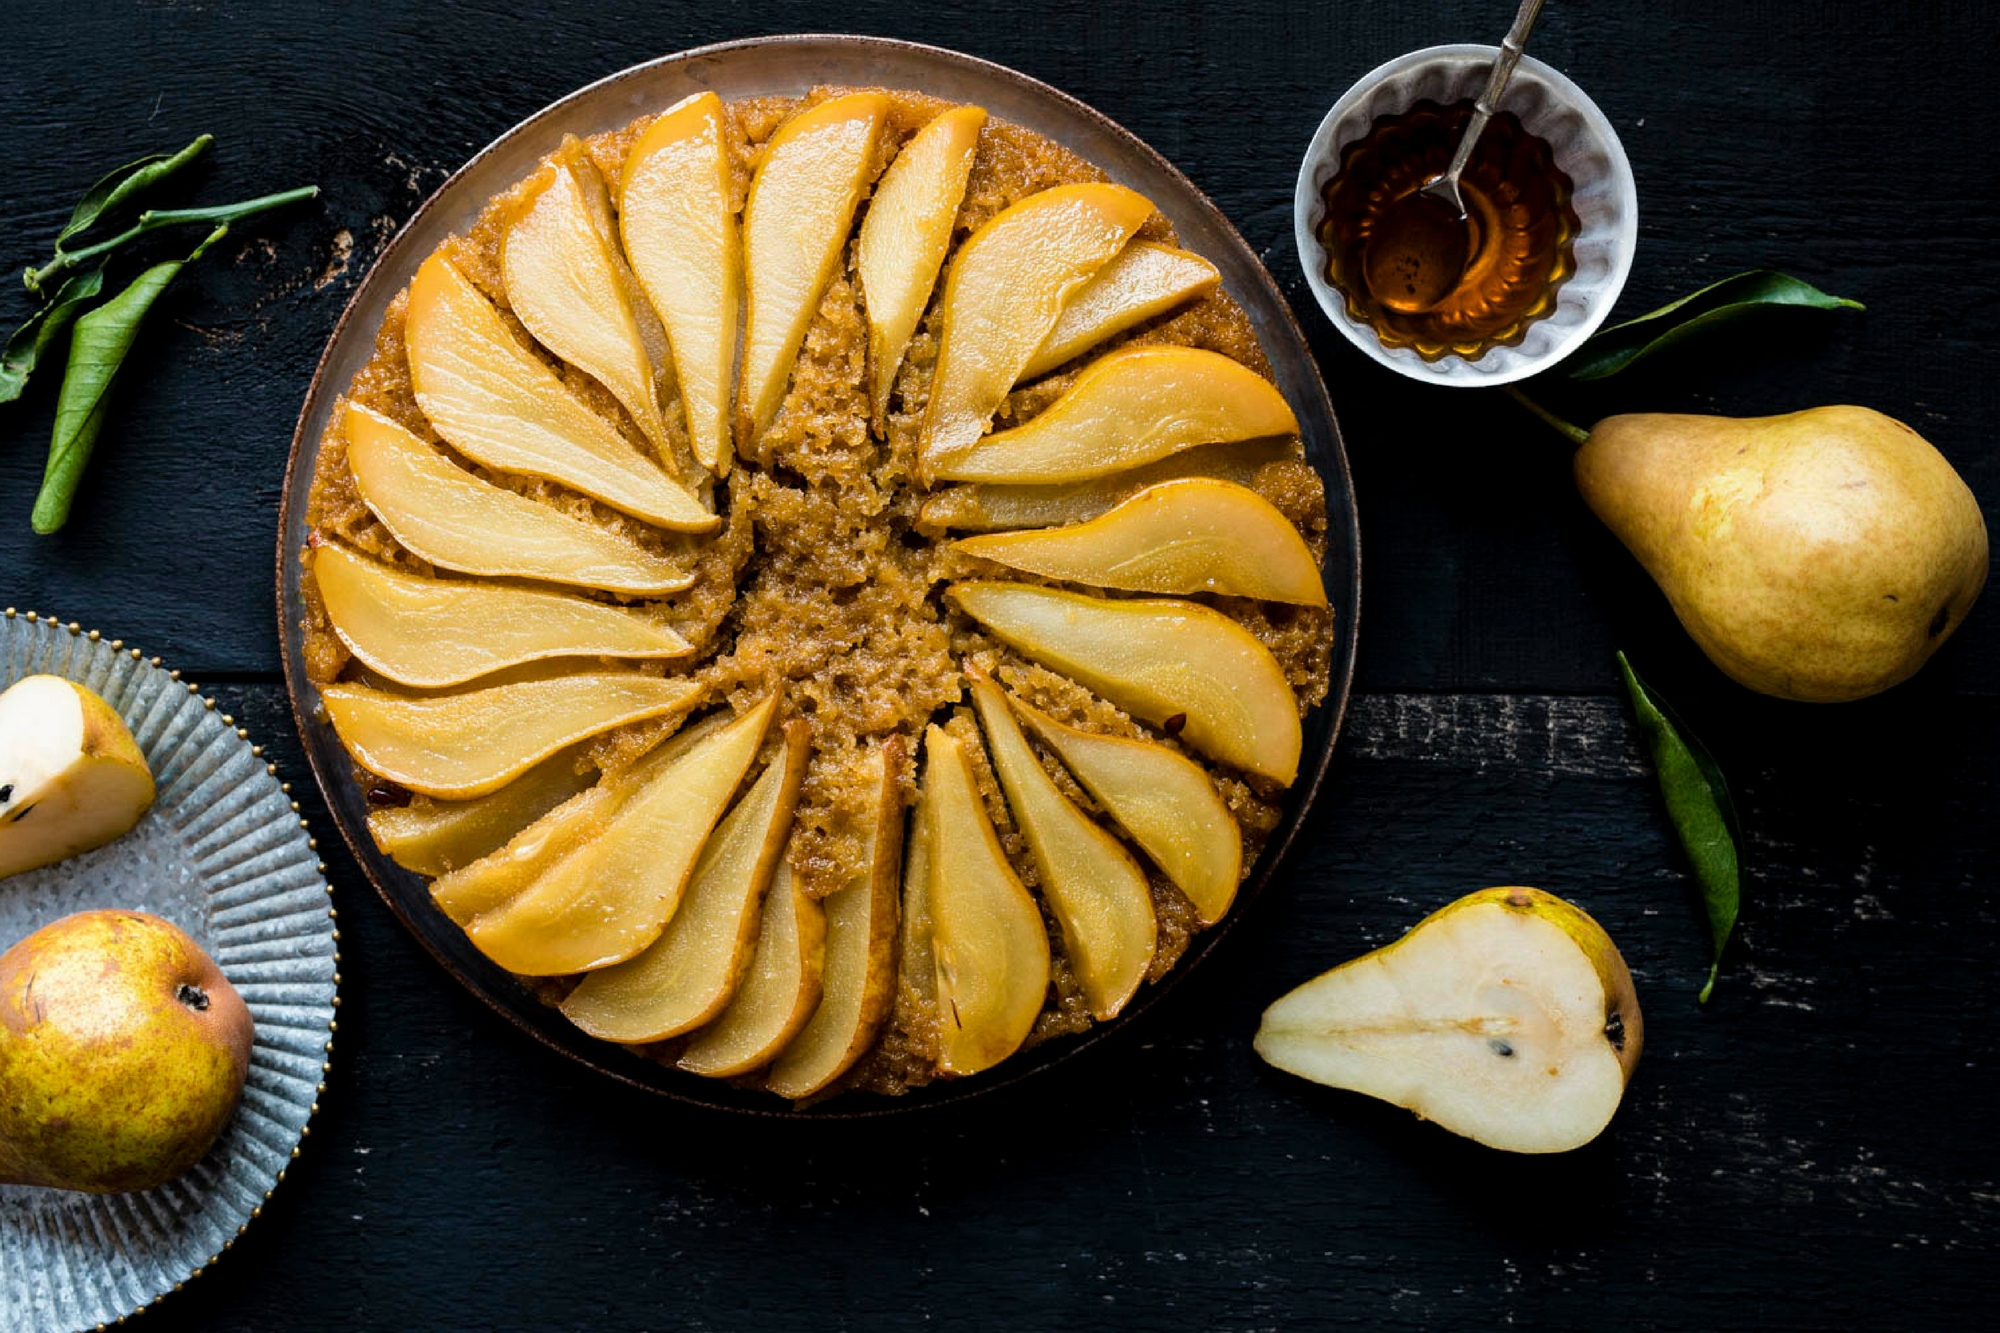 Pear, Almond and Maple Syrup Upside-down Cake